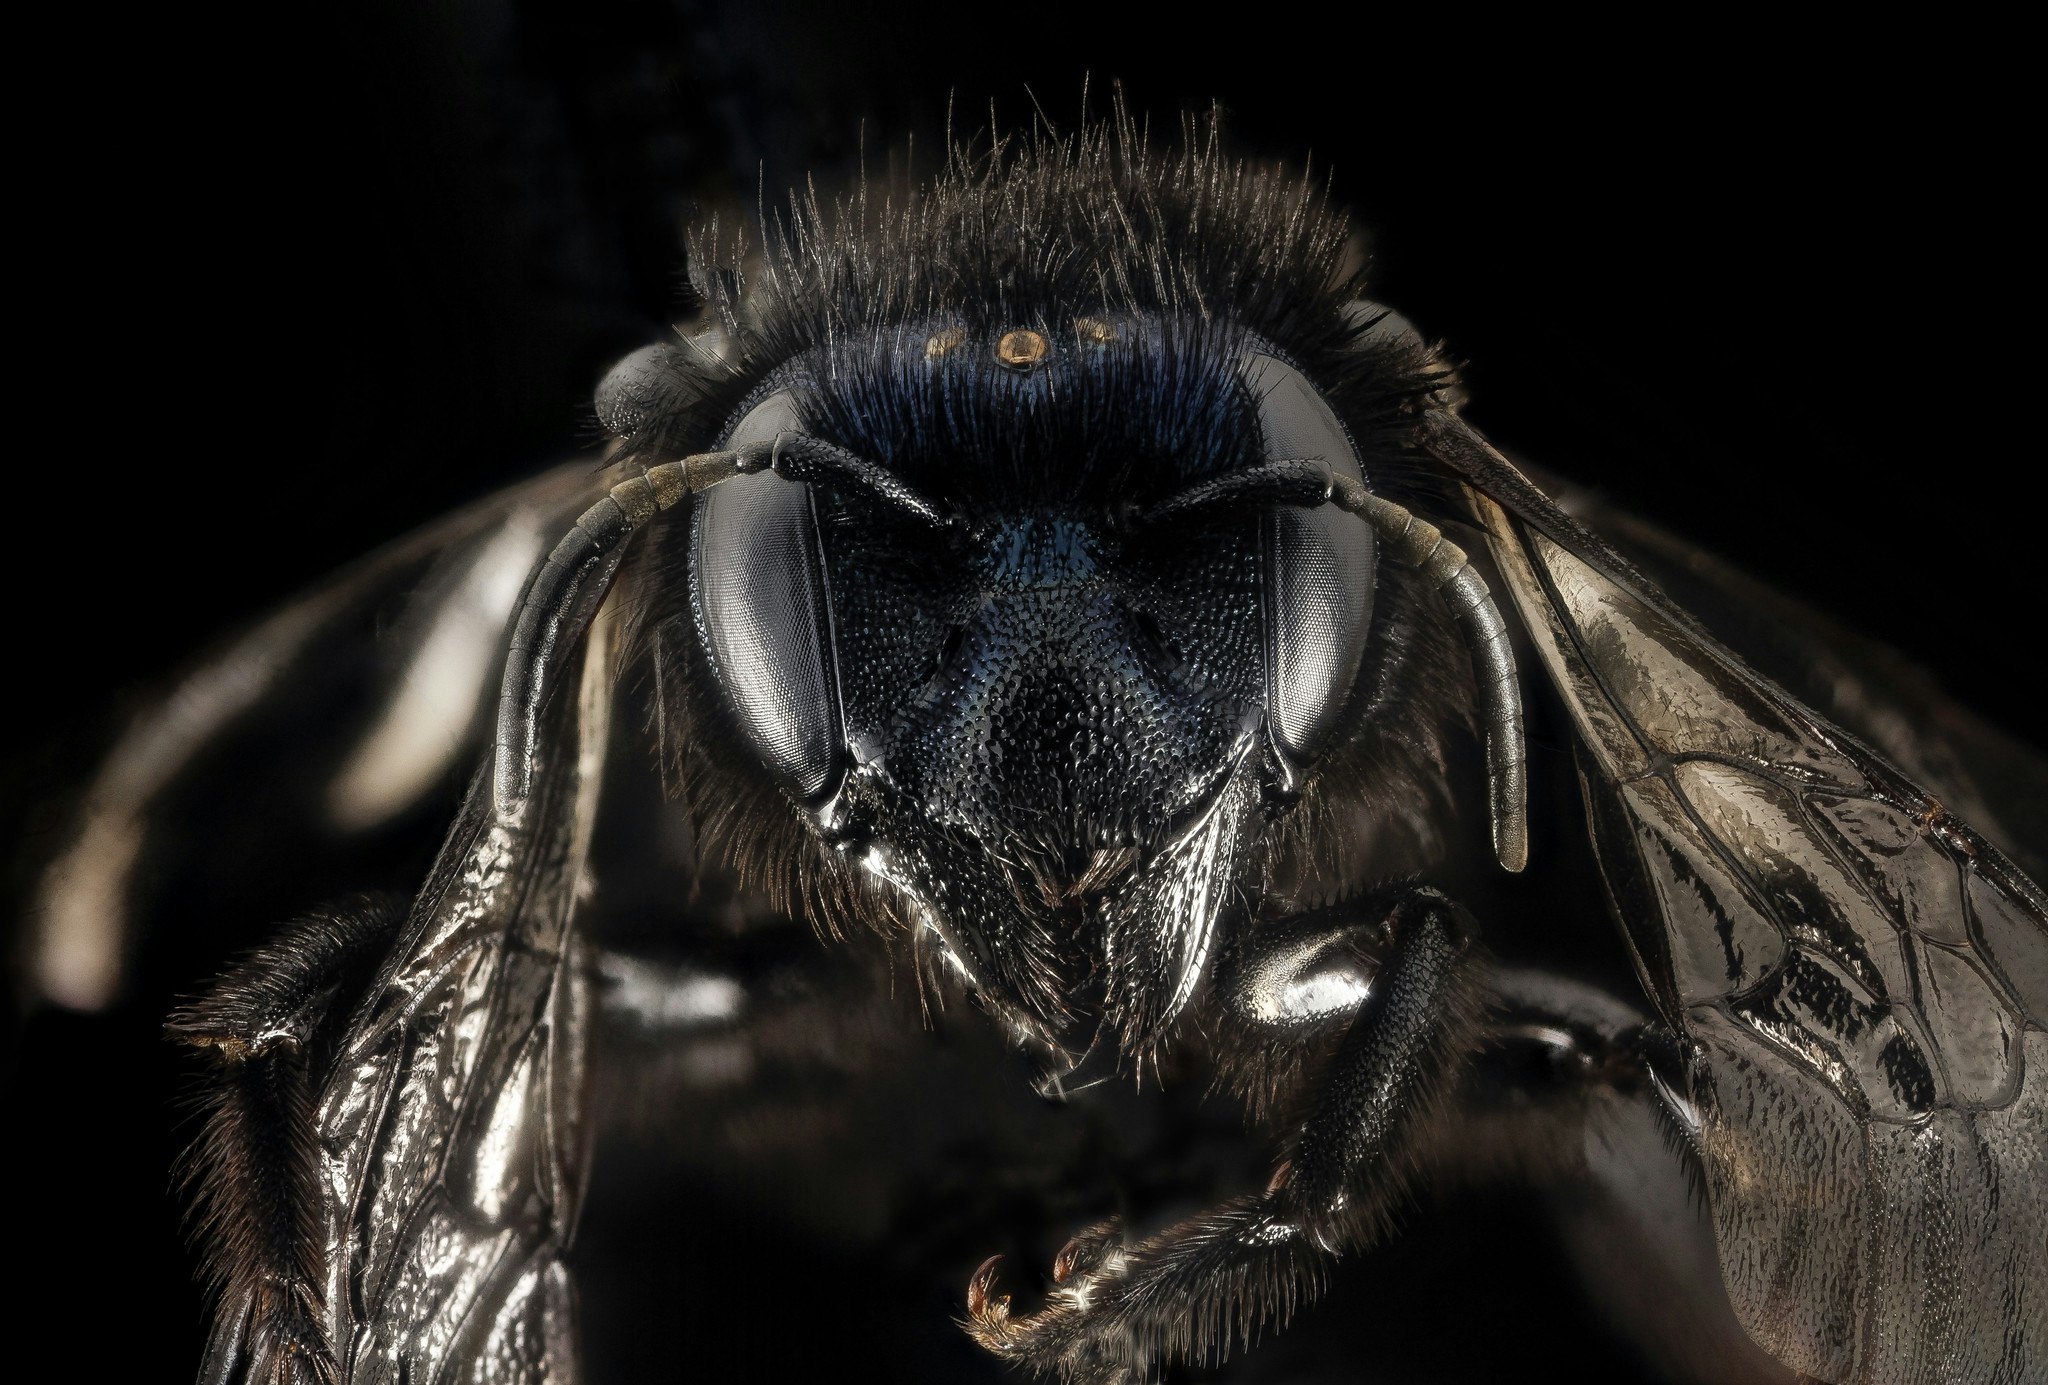 a close up of a bee's face against a black background